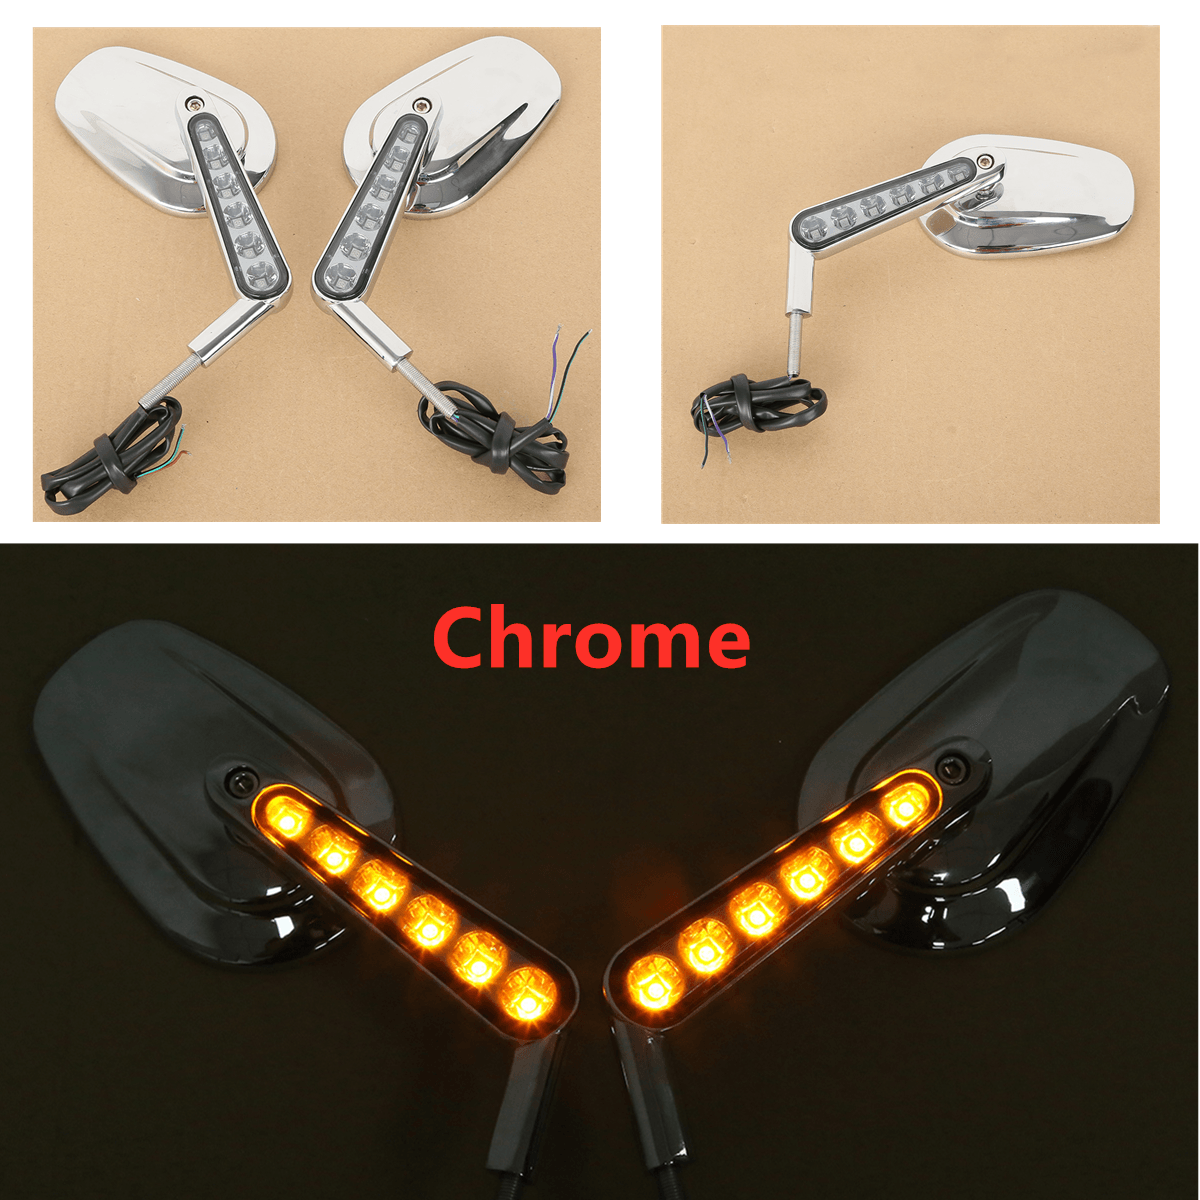 Rearview Mirrors W/ LED Turn Signals Fit For Harley Davidson V-Rod VRSCF 09-17 - Moto Life Products